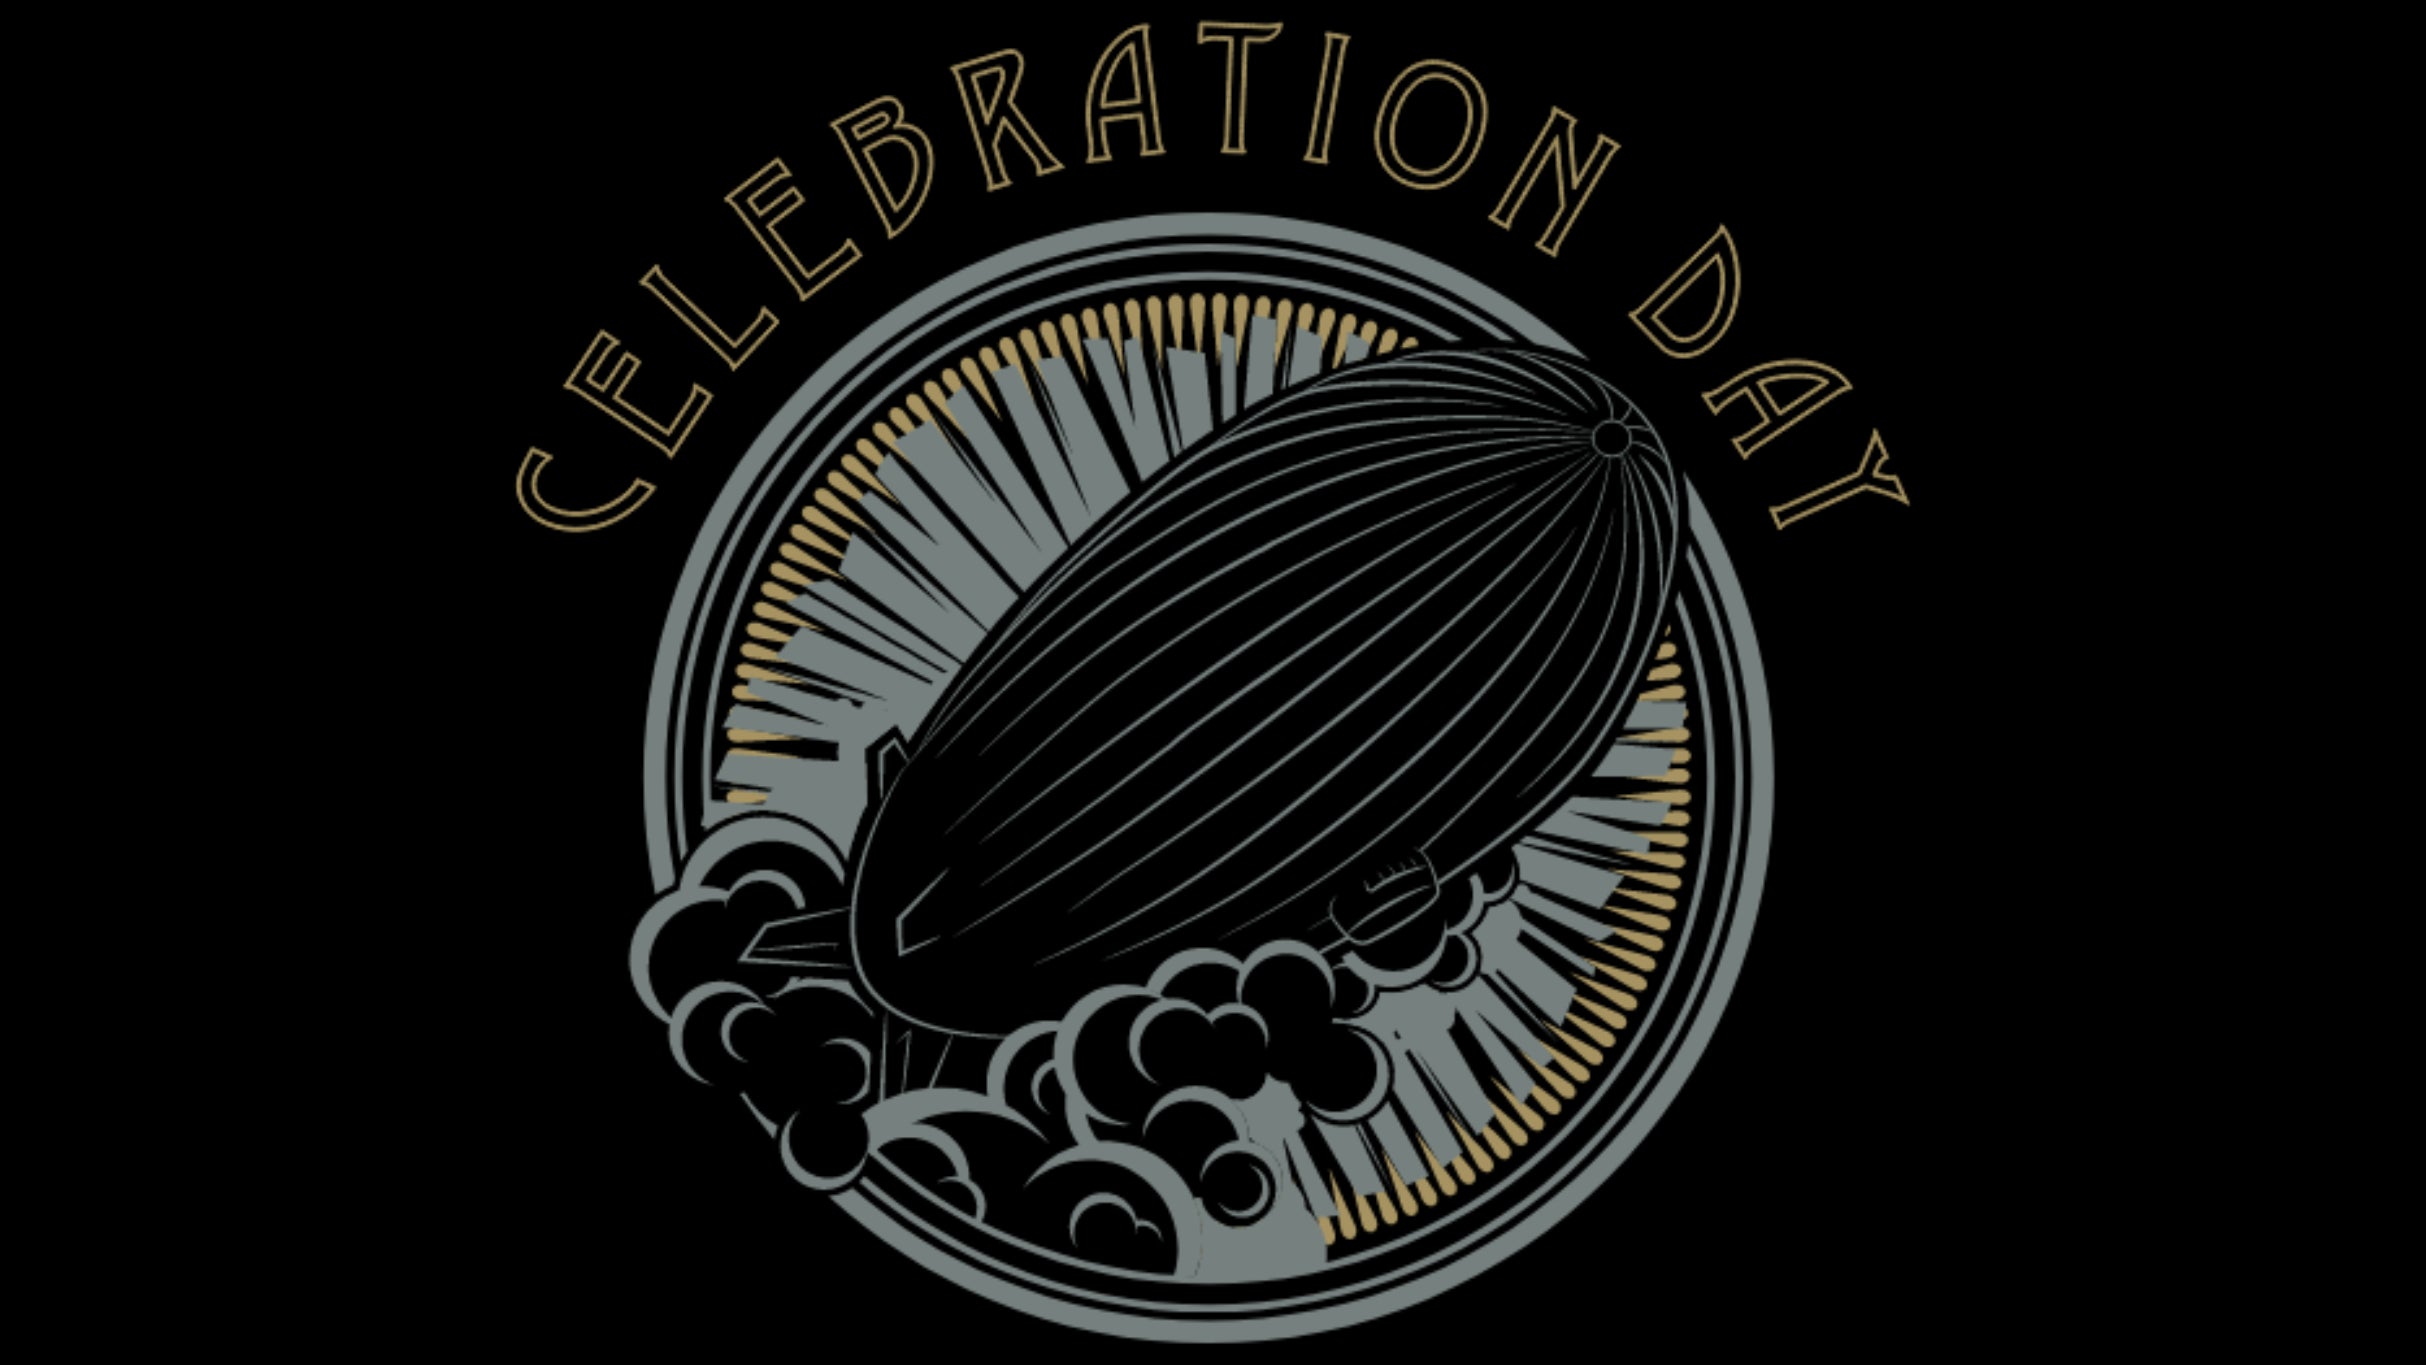 Celebration Day - A KSHE 95 Rock And Roll Fantasy presale code for concert tickets in Maryland Heights, MO (Saint Louis Music Park)